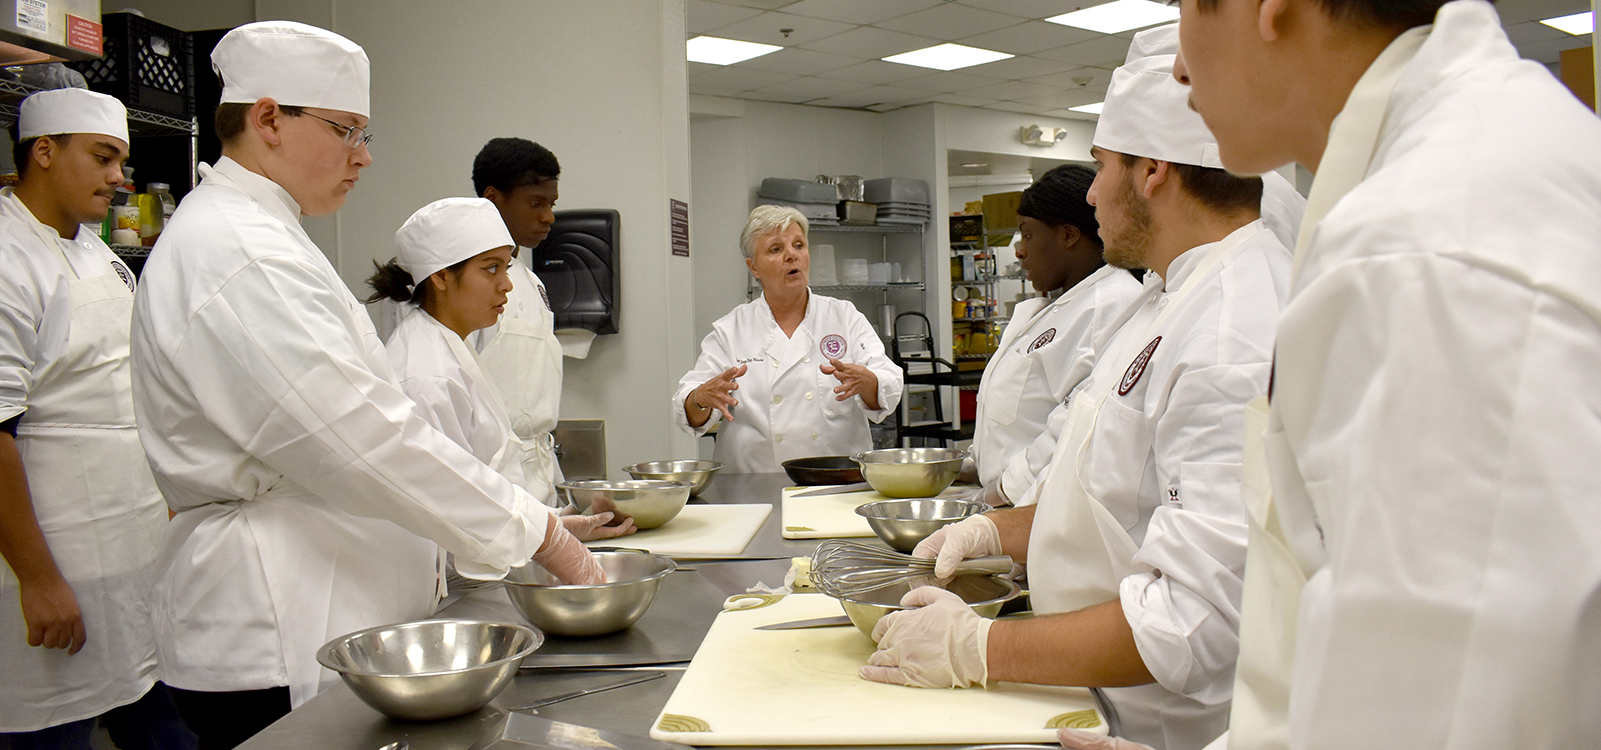 Culinary Arts Associates students stand around table full of kitchen tools listening to instructor